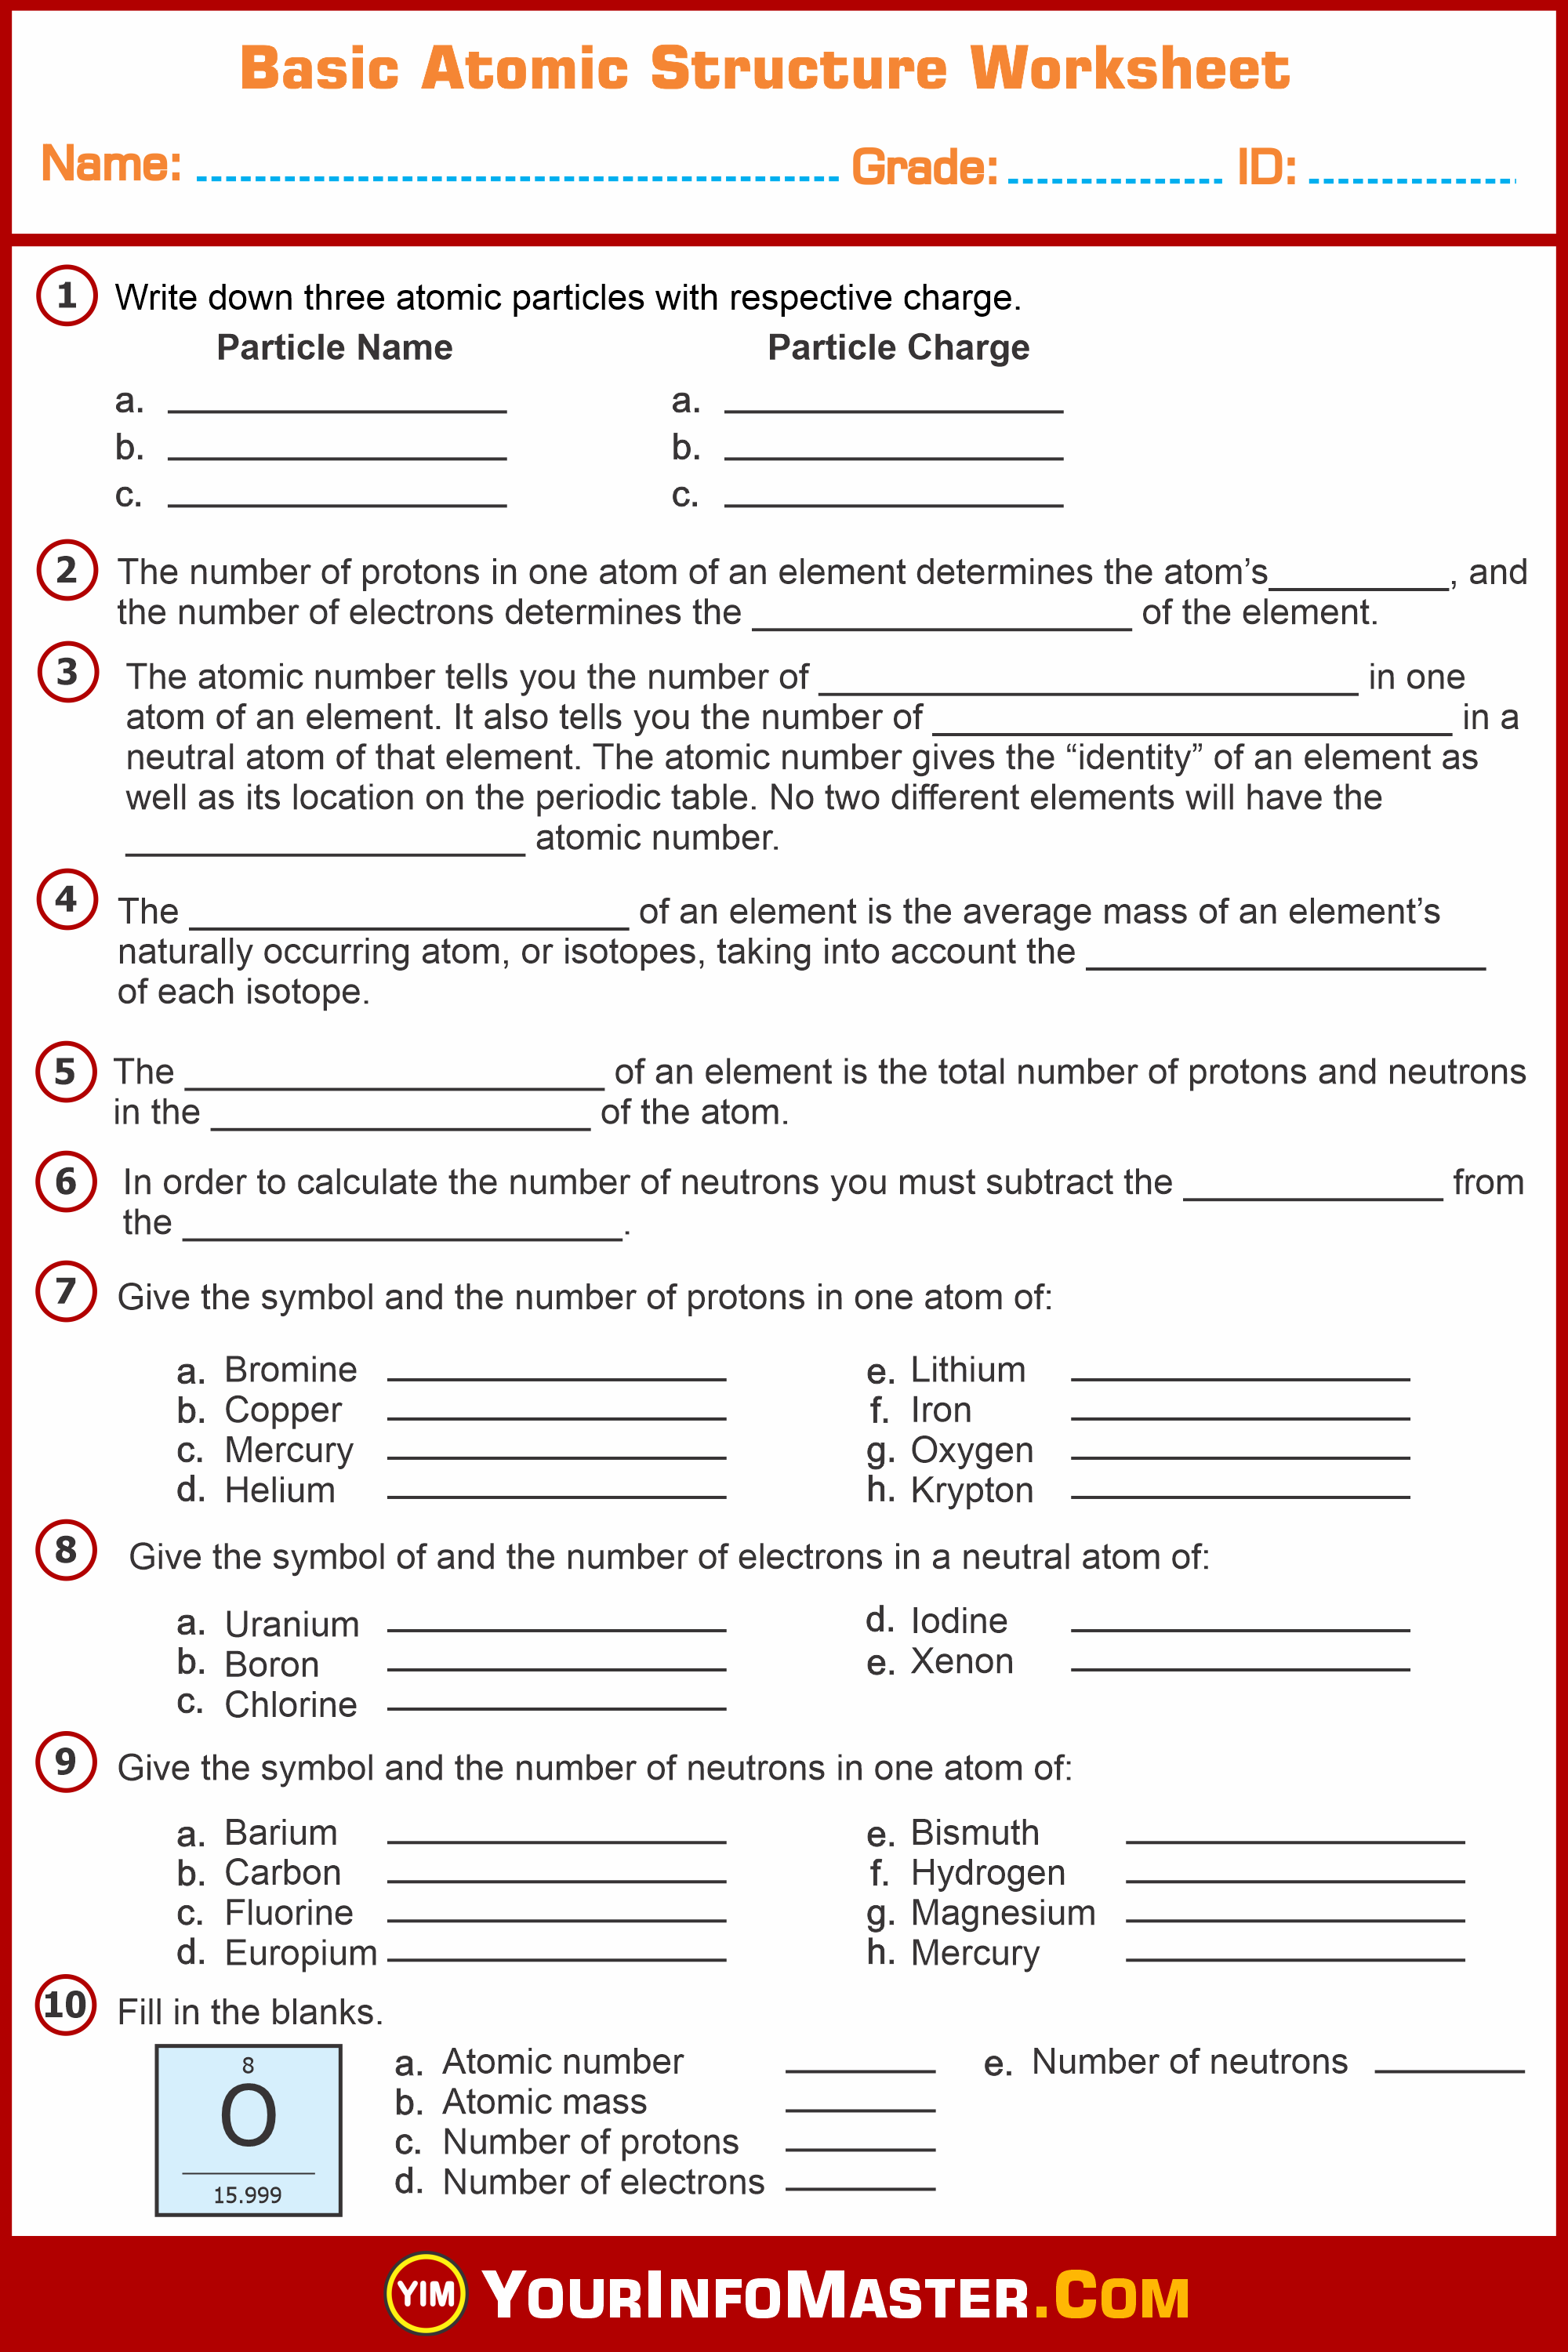 Basic Atomic Structure Worksheet - Your Info Master Within Atomic Structure Worksheet Pdf